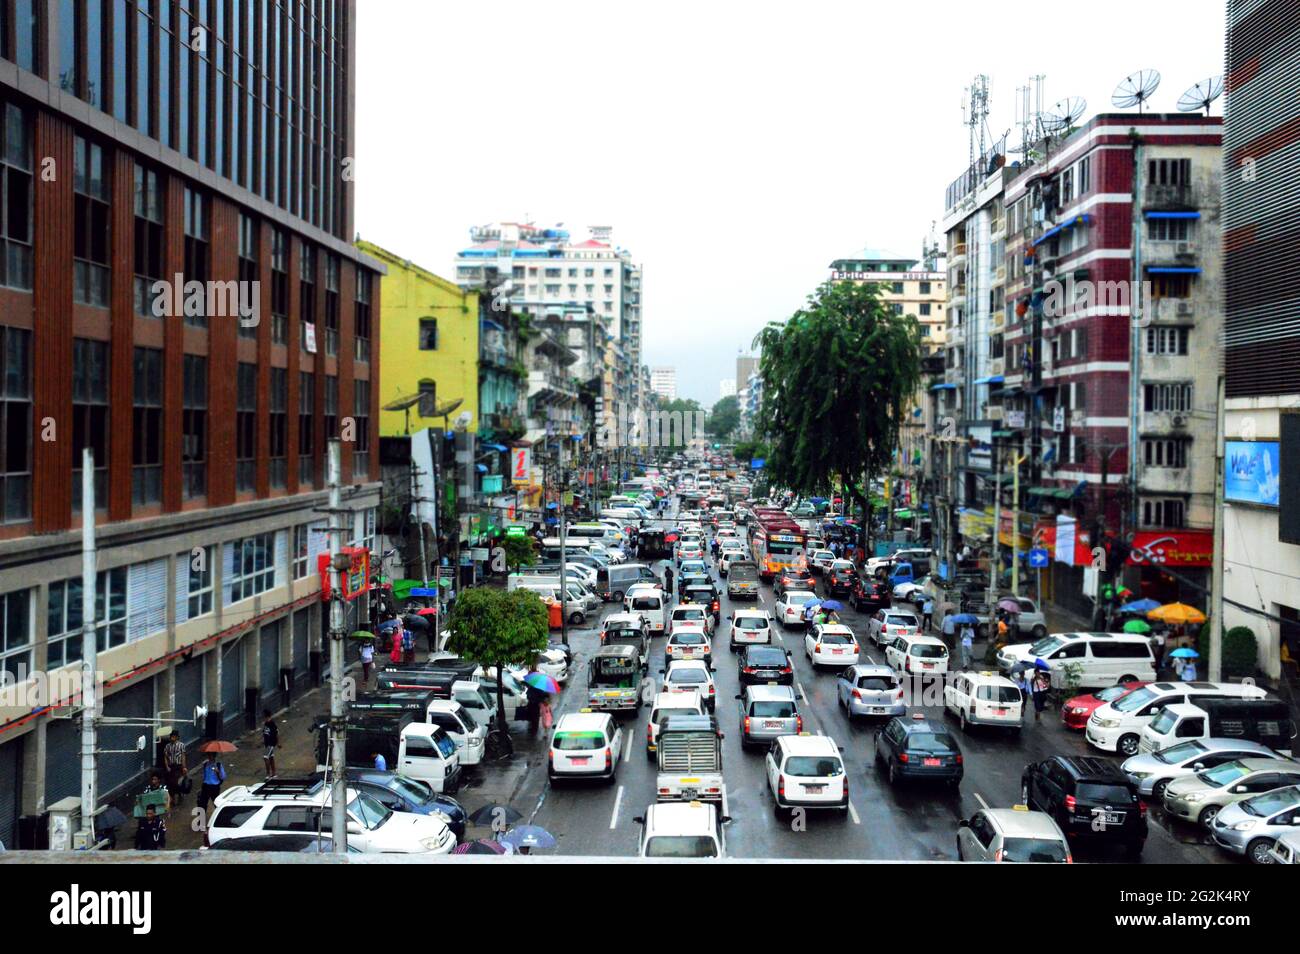 A busy heavy traffic street of Yangon, the capital of Myanmar. Life before the military coup seized control. Stock Photo